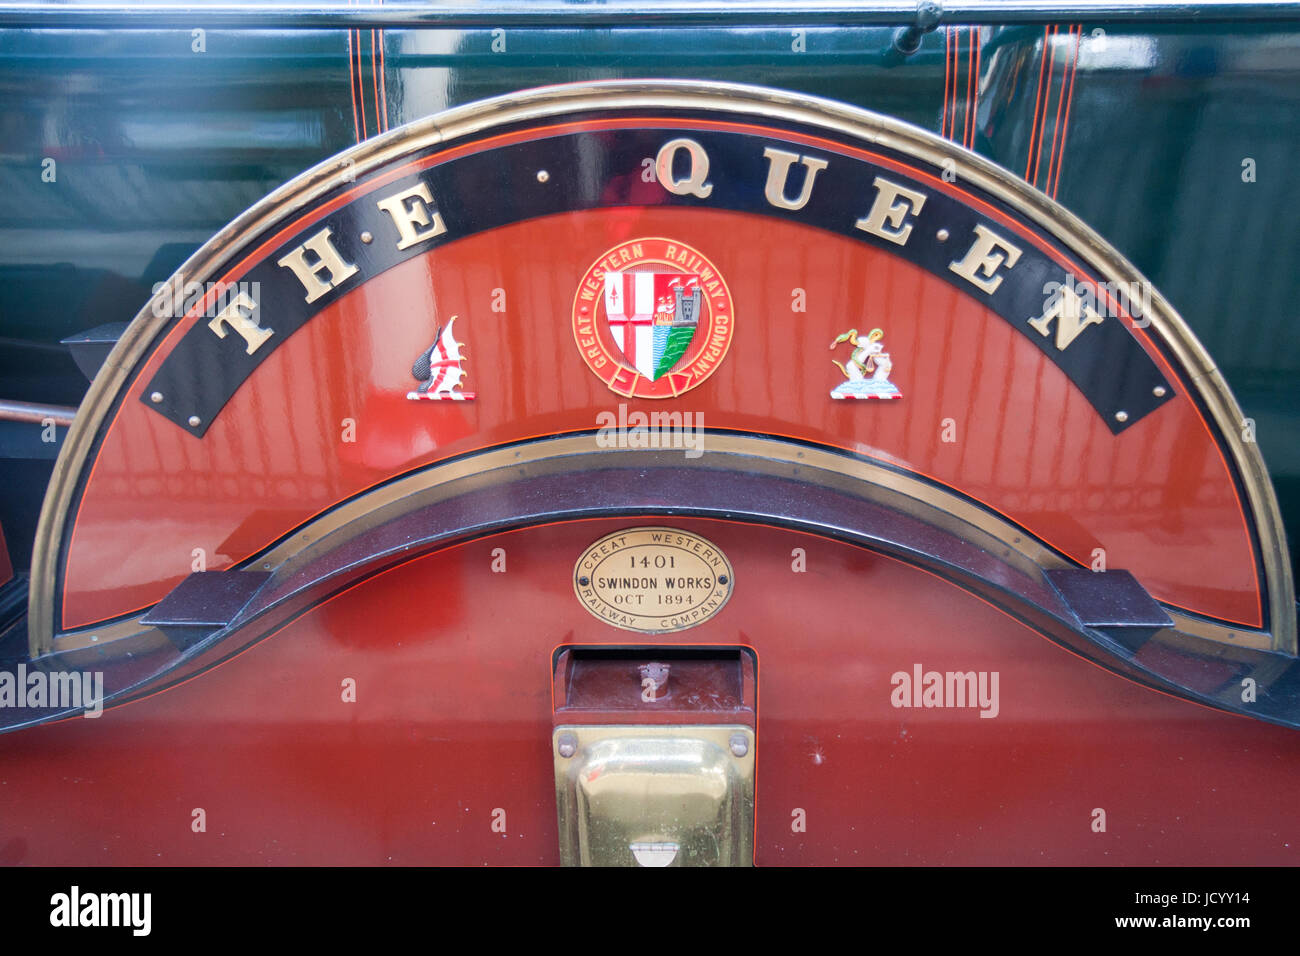 The Great Western Railway Company  locomotive 'The Queen' built in 1894 at Swindon works, Windsor, Berkshire, England, United Kingdom Stock Photo